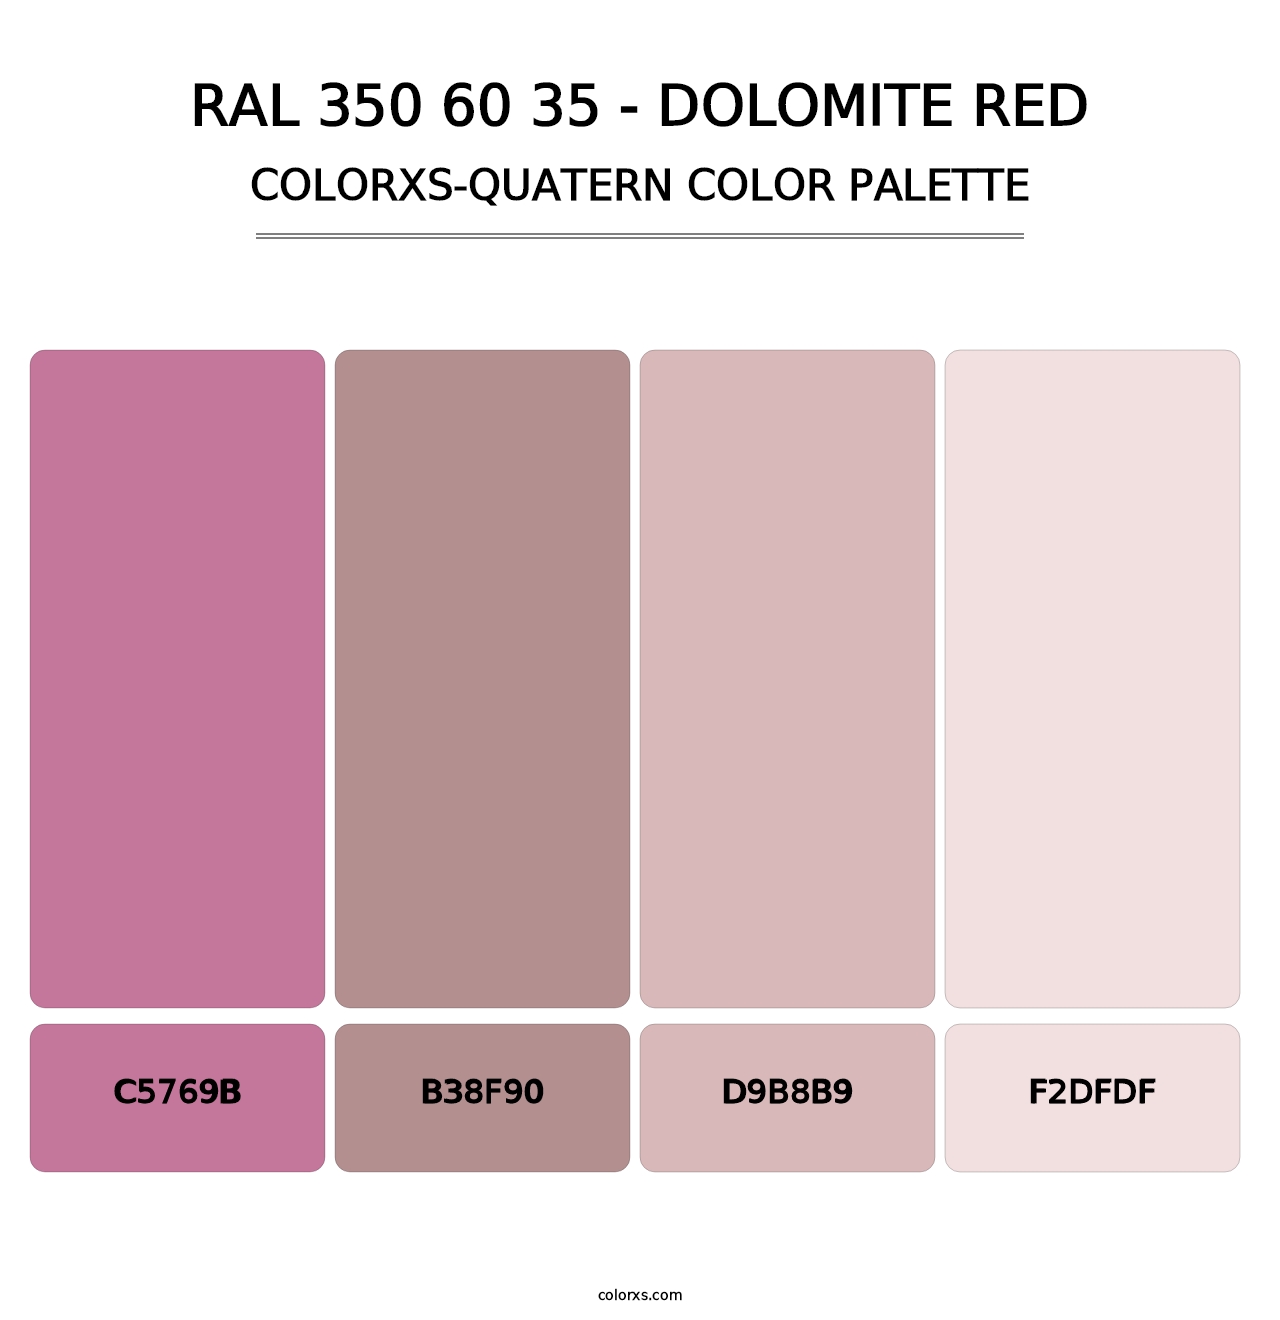 RAL 350 60 35 - Dolomite Red - Colorxs Quatern Palette